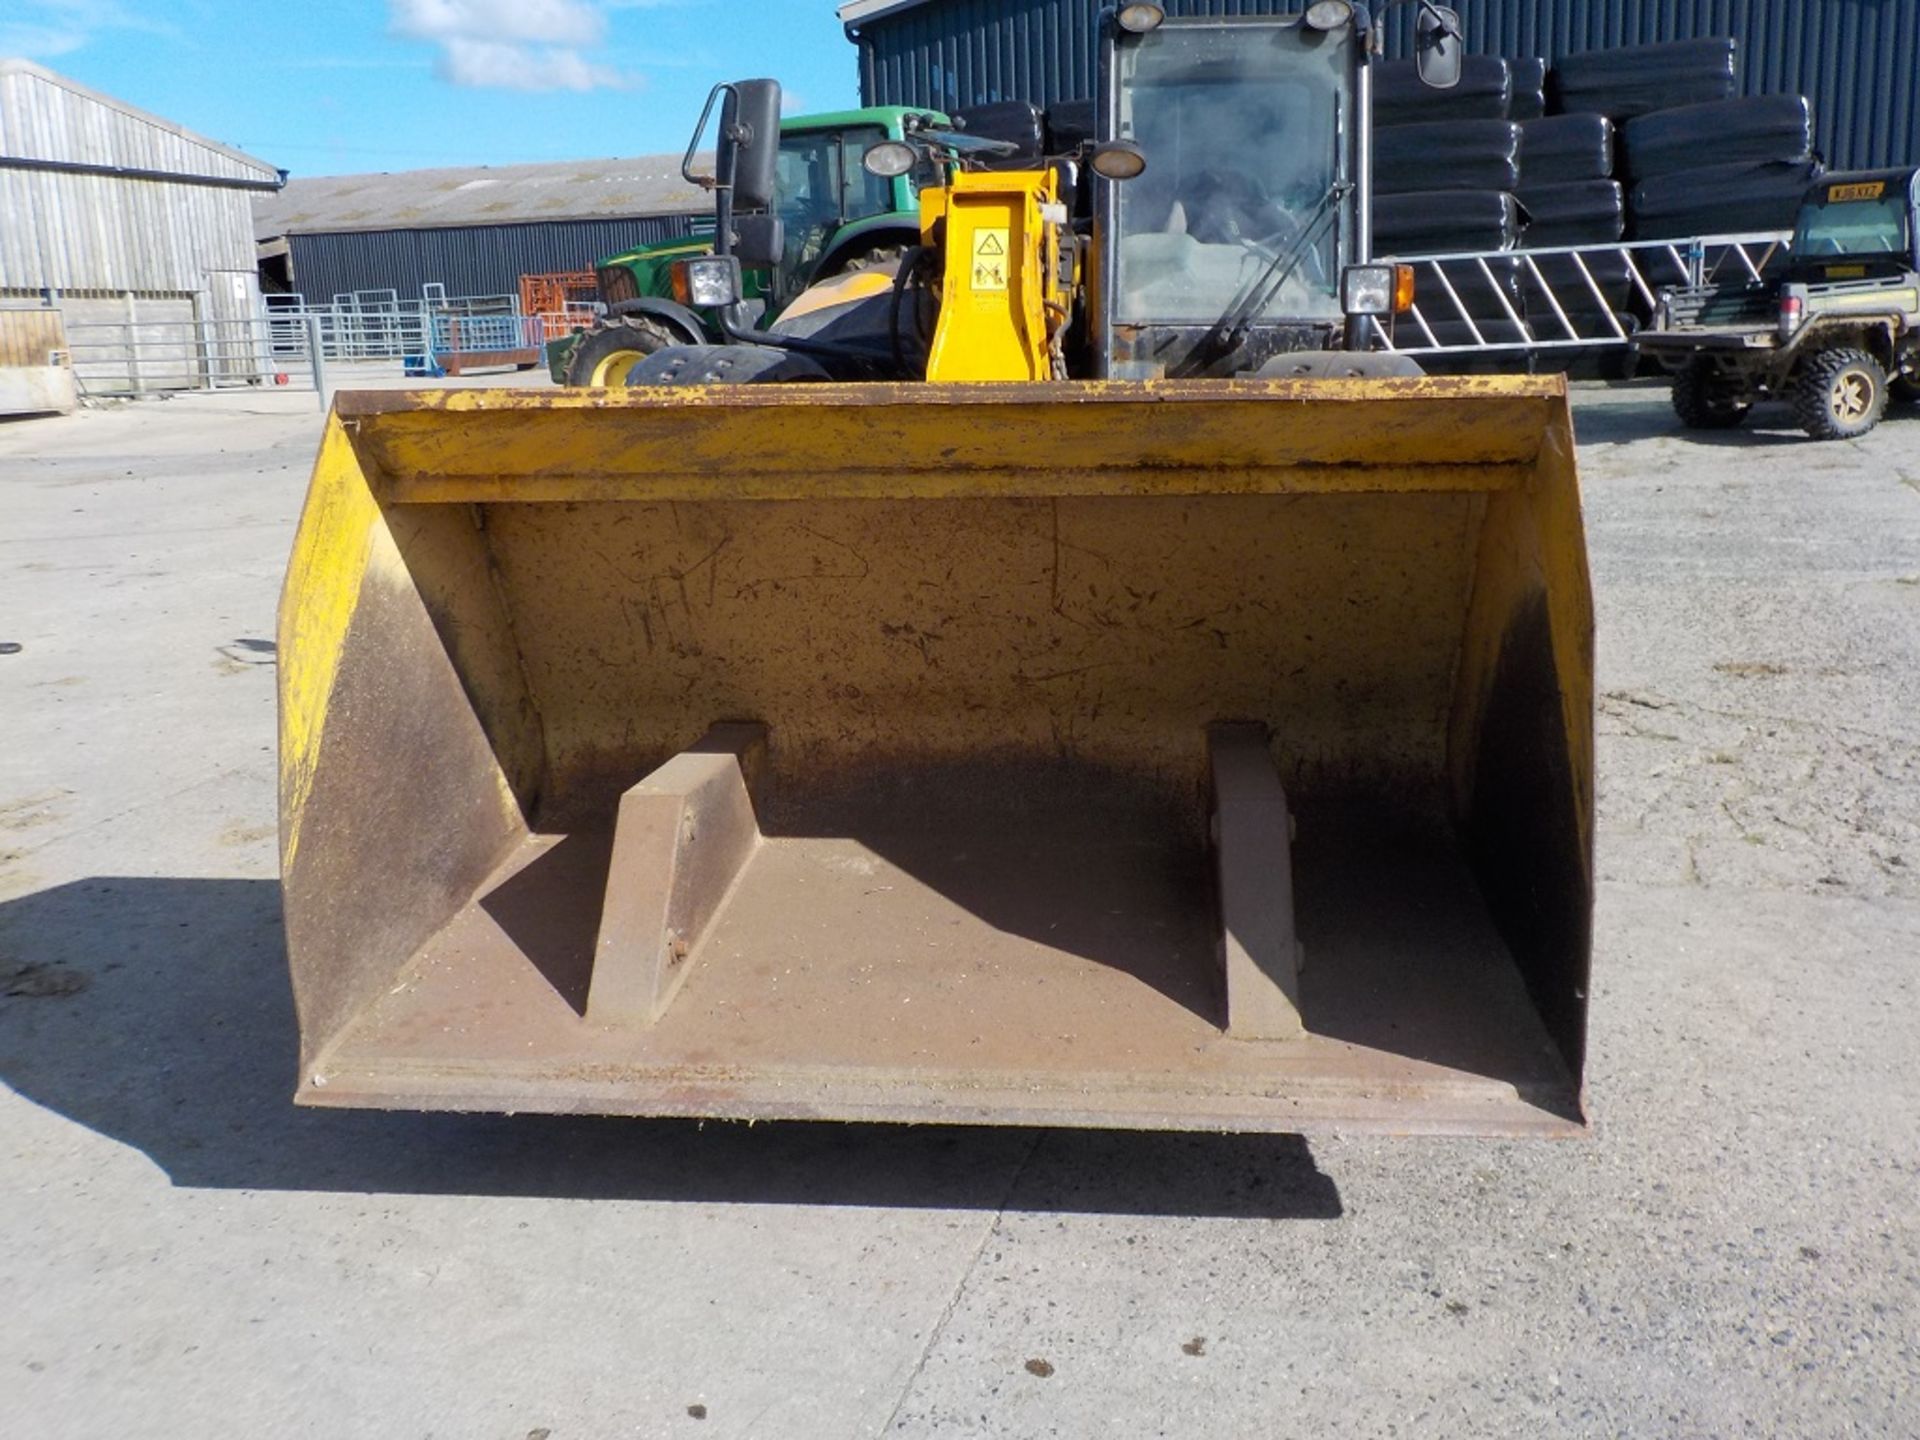 Grays Toe Tip Bucket. Has Matbro fittings, holds 1,100 kg's wheat. Location: Bude, Cornwall.